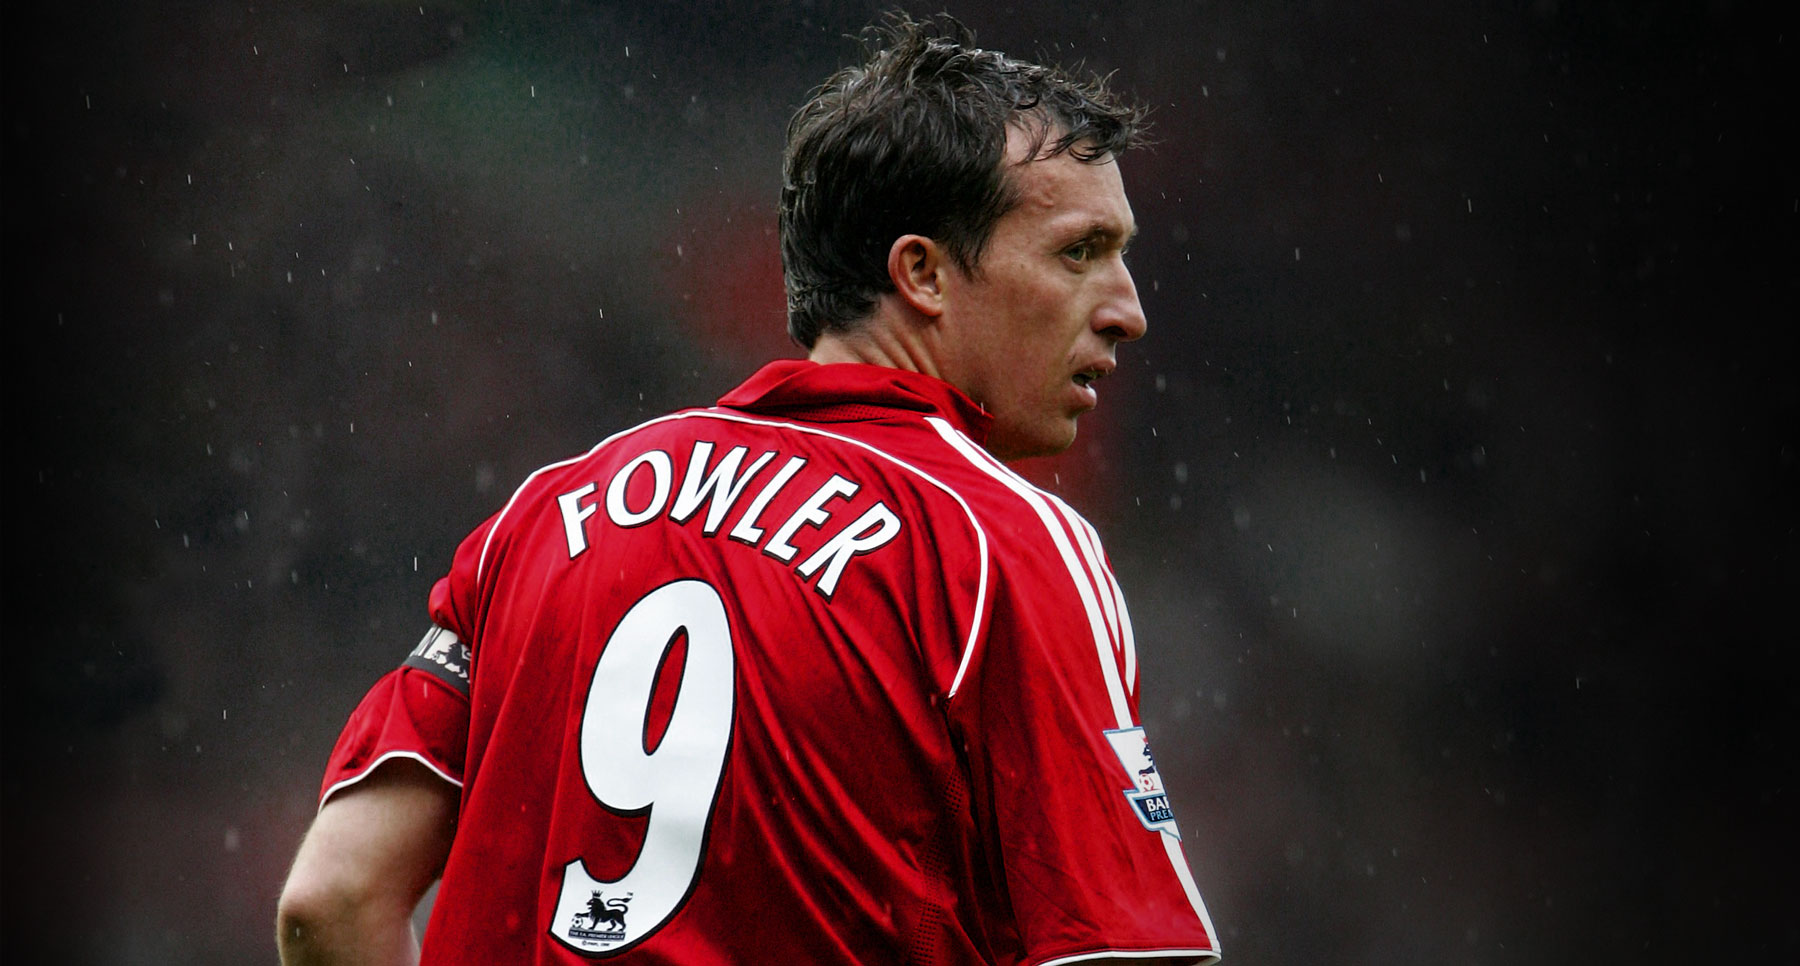 Robbie Fowler, Liverpool | Squad Numbers